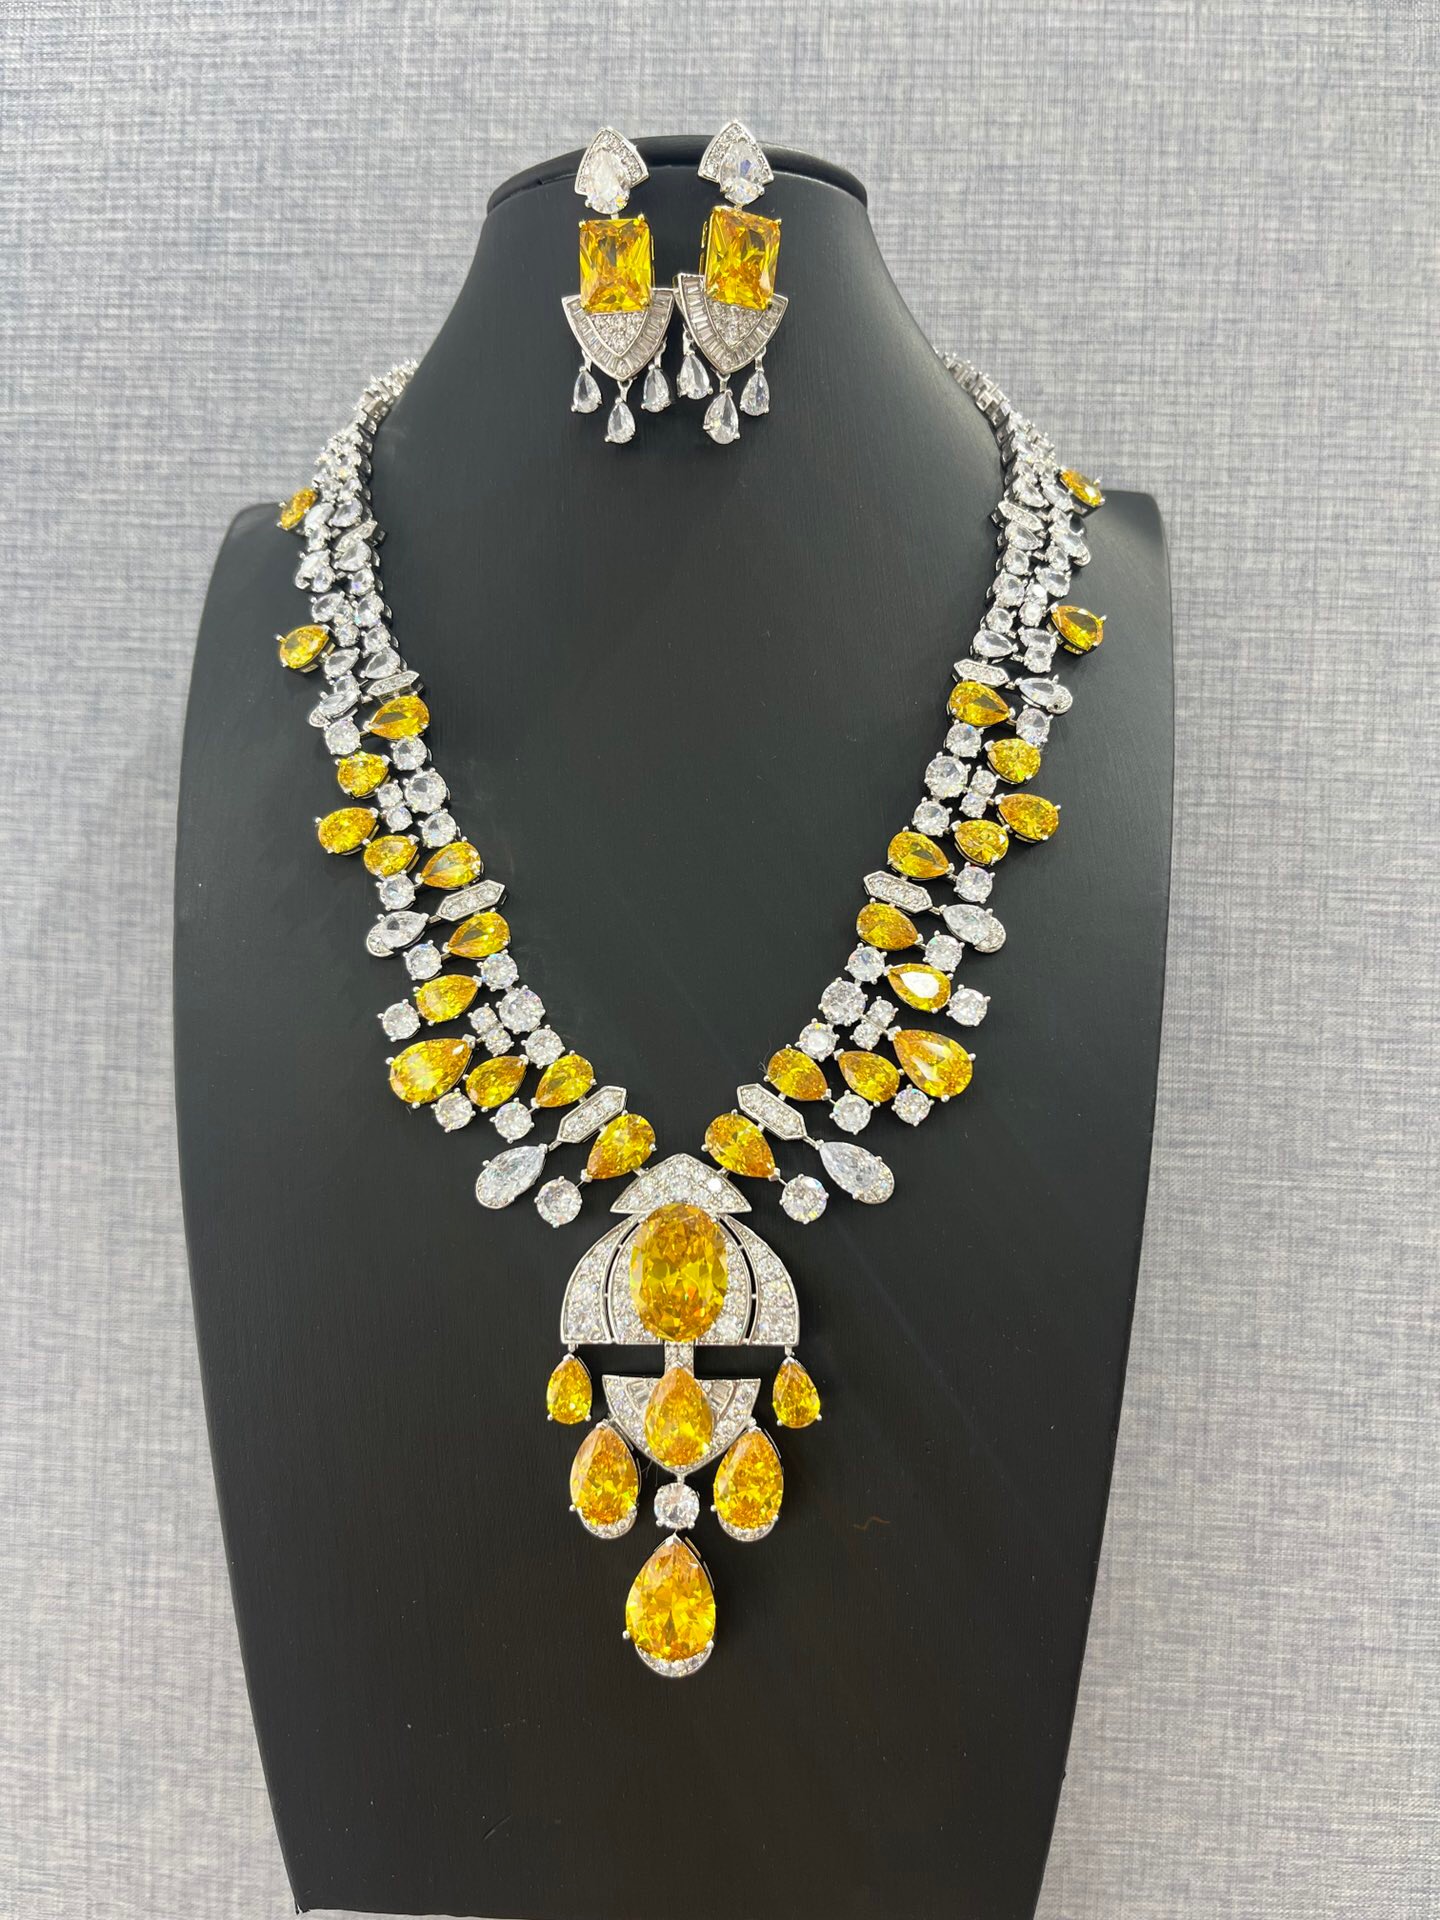 BVLGARI Necklace&Earrings CE12244